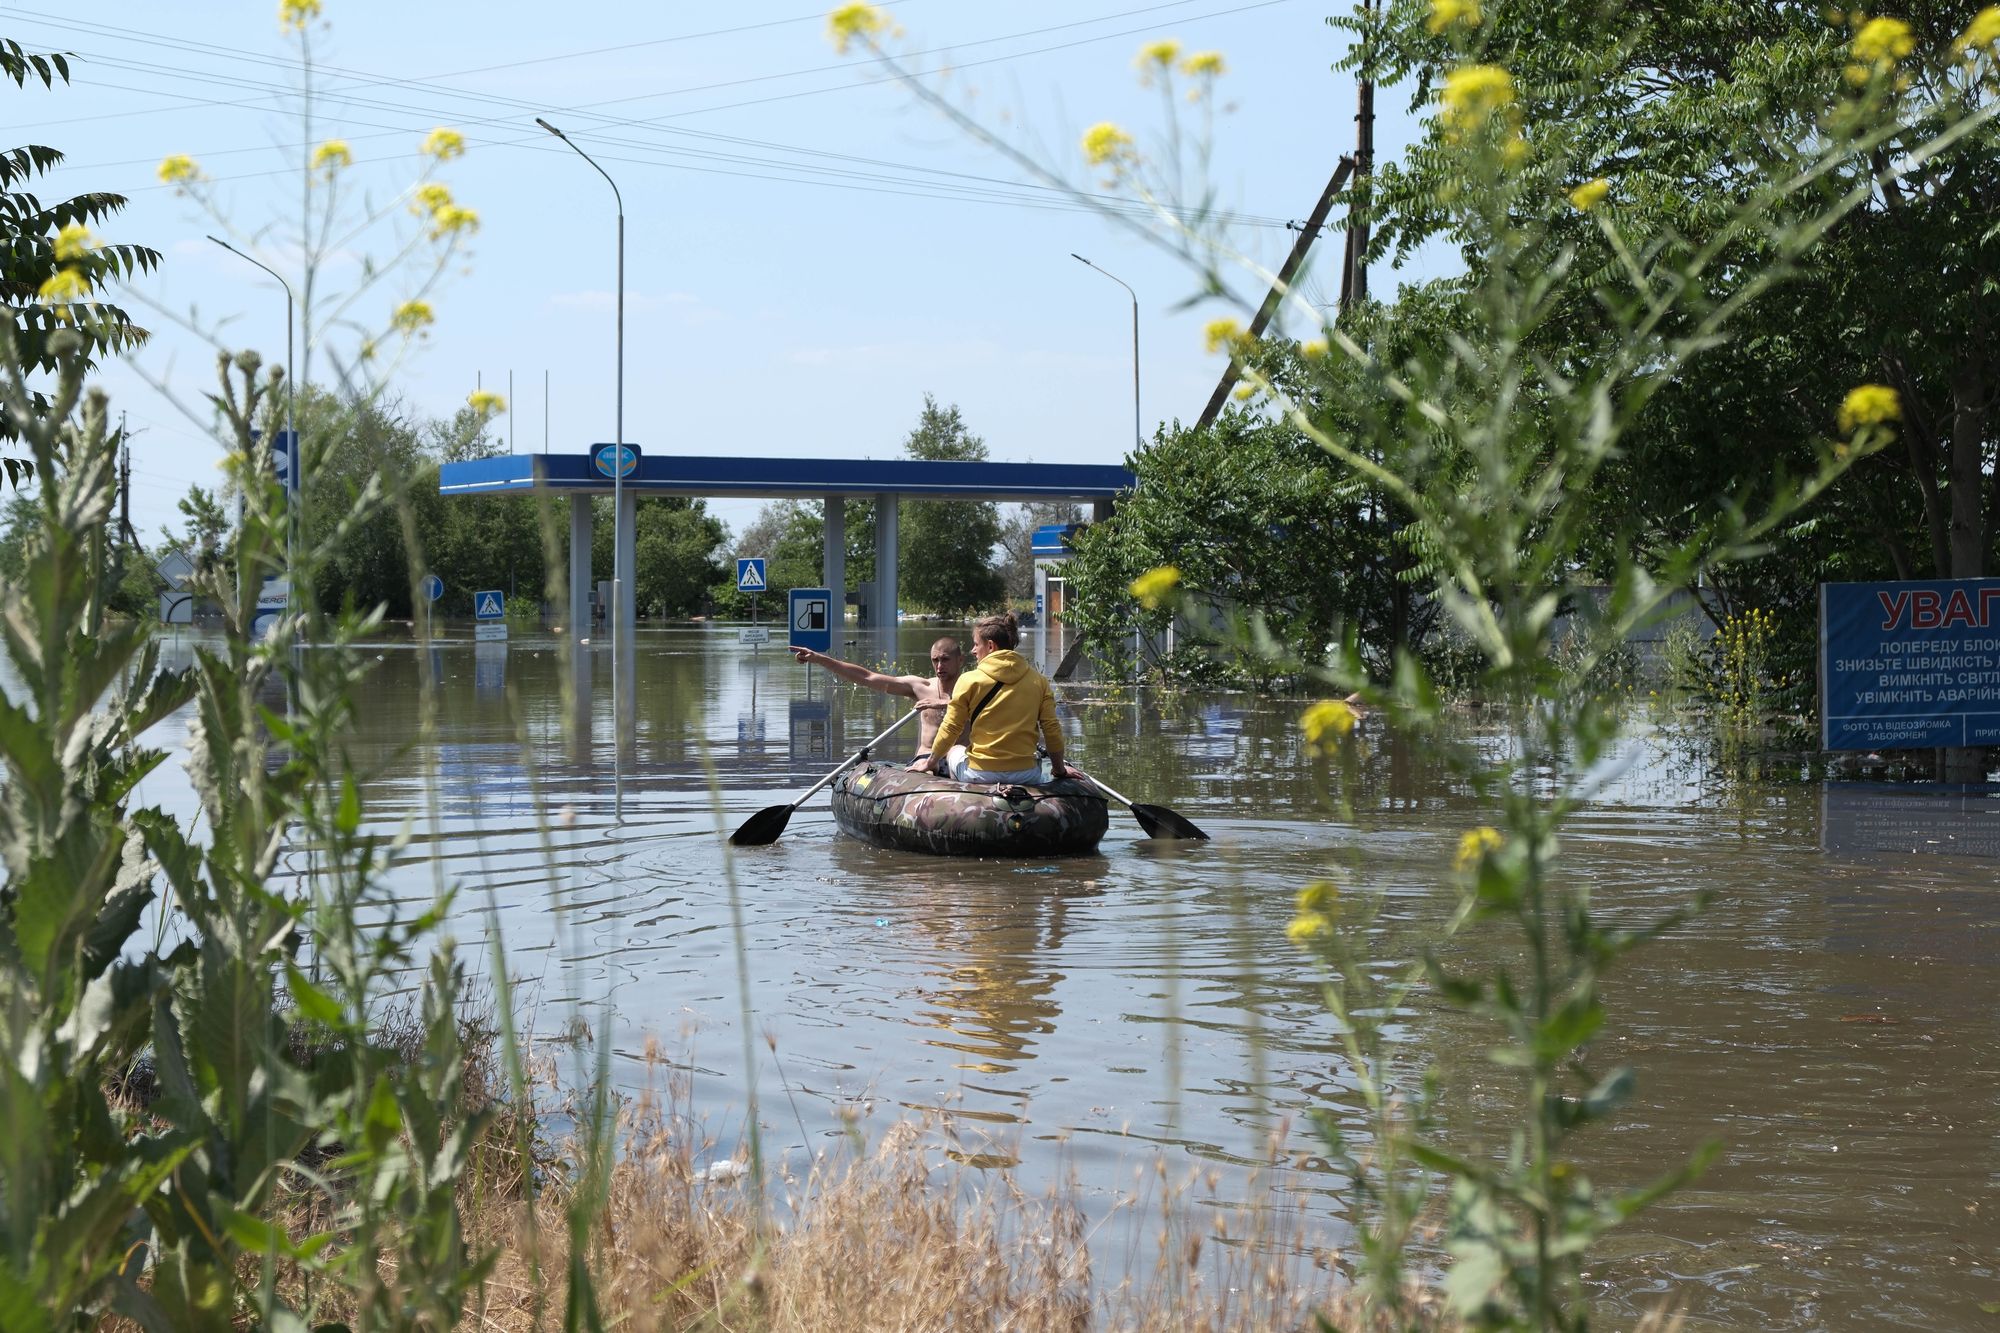 Saving lives from Russia’s flood: Inside inundated, shelled Kherson